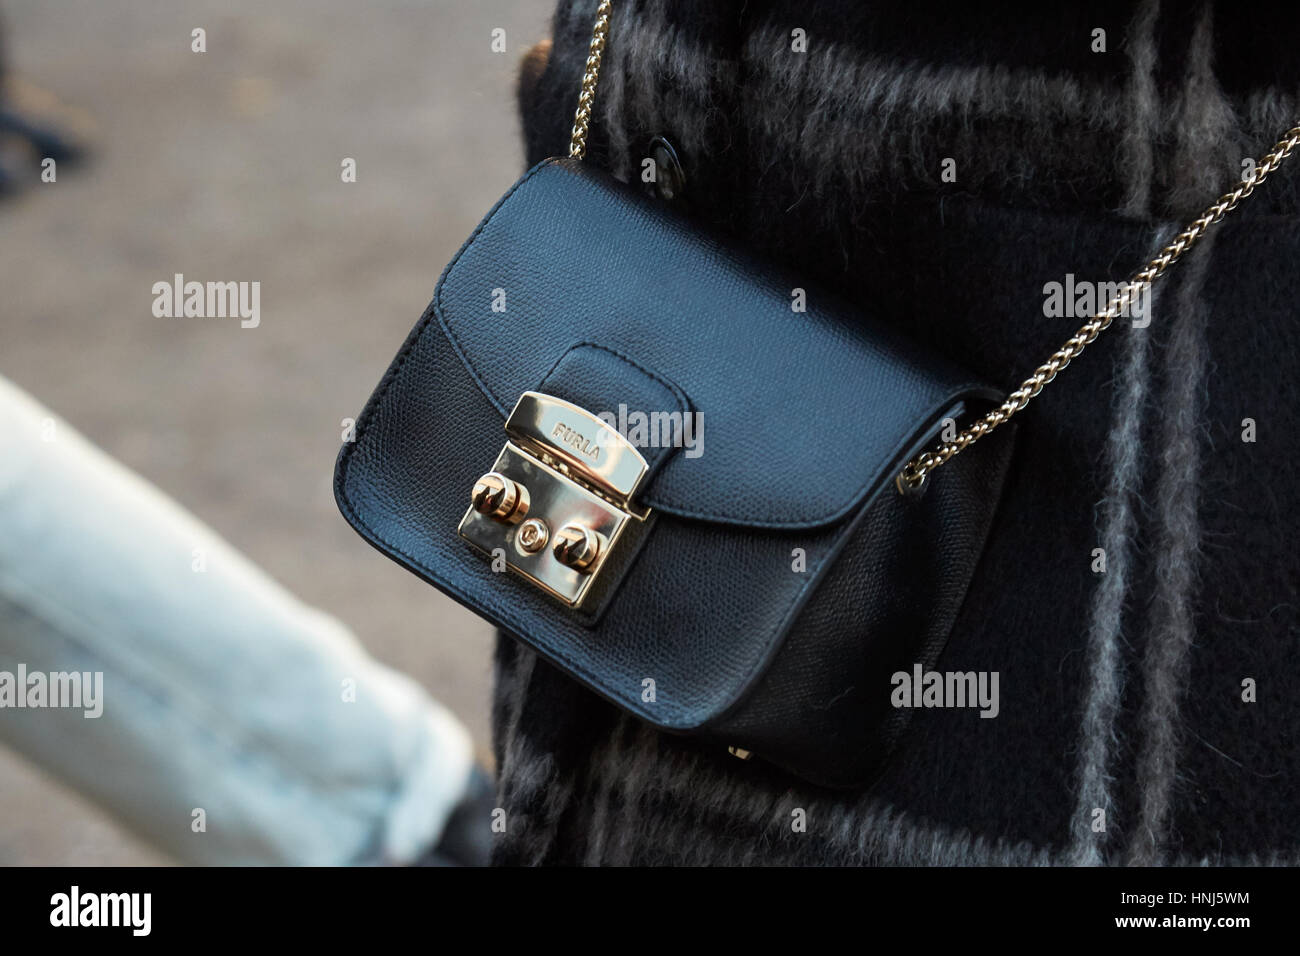 MILAN - JANUARY 14: Woman with Furla black leather bag before Diesel Black Gold fashion show, Milan Fashion Week street style on January 14, 2017 in M Stock Photo